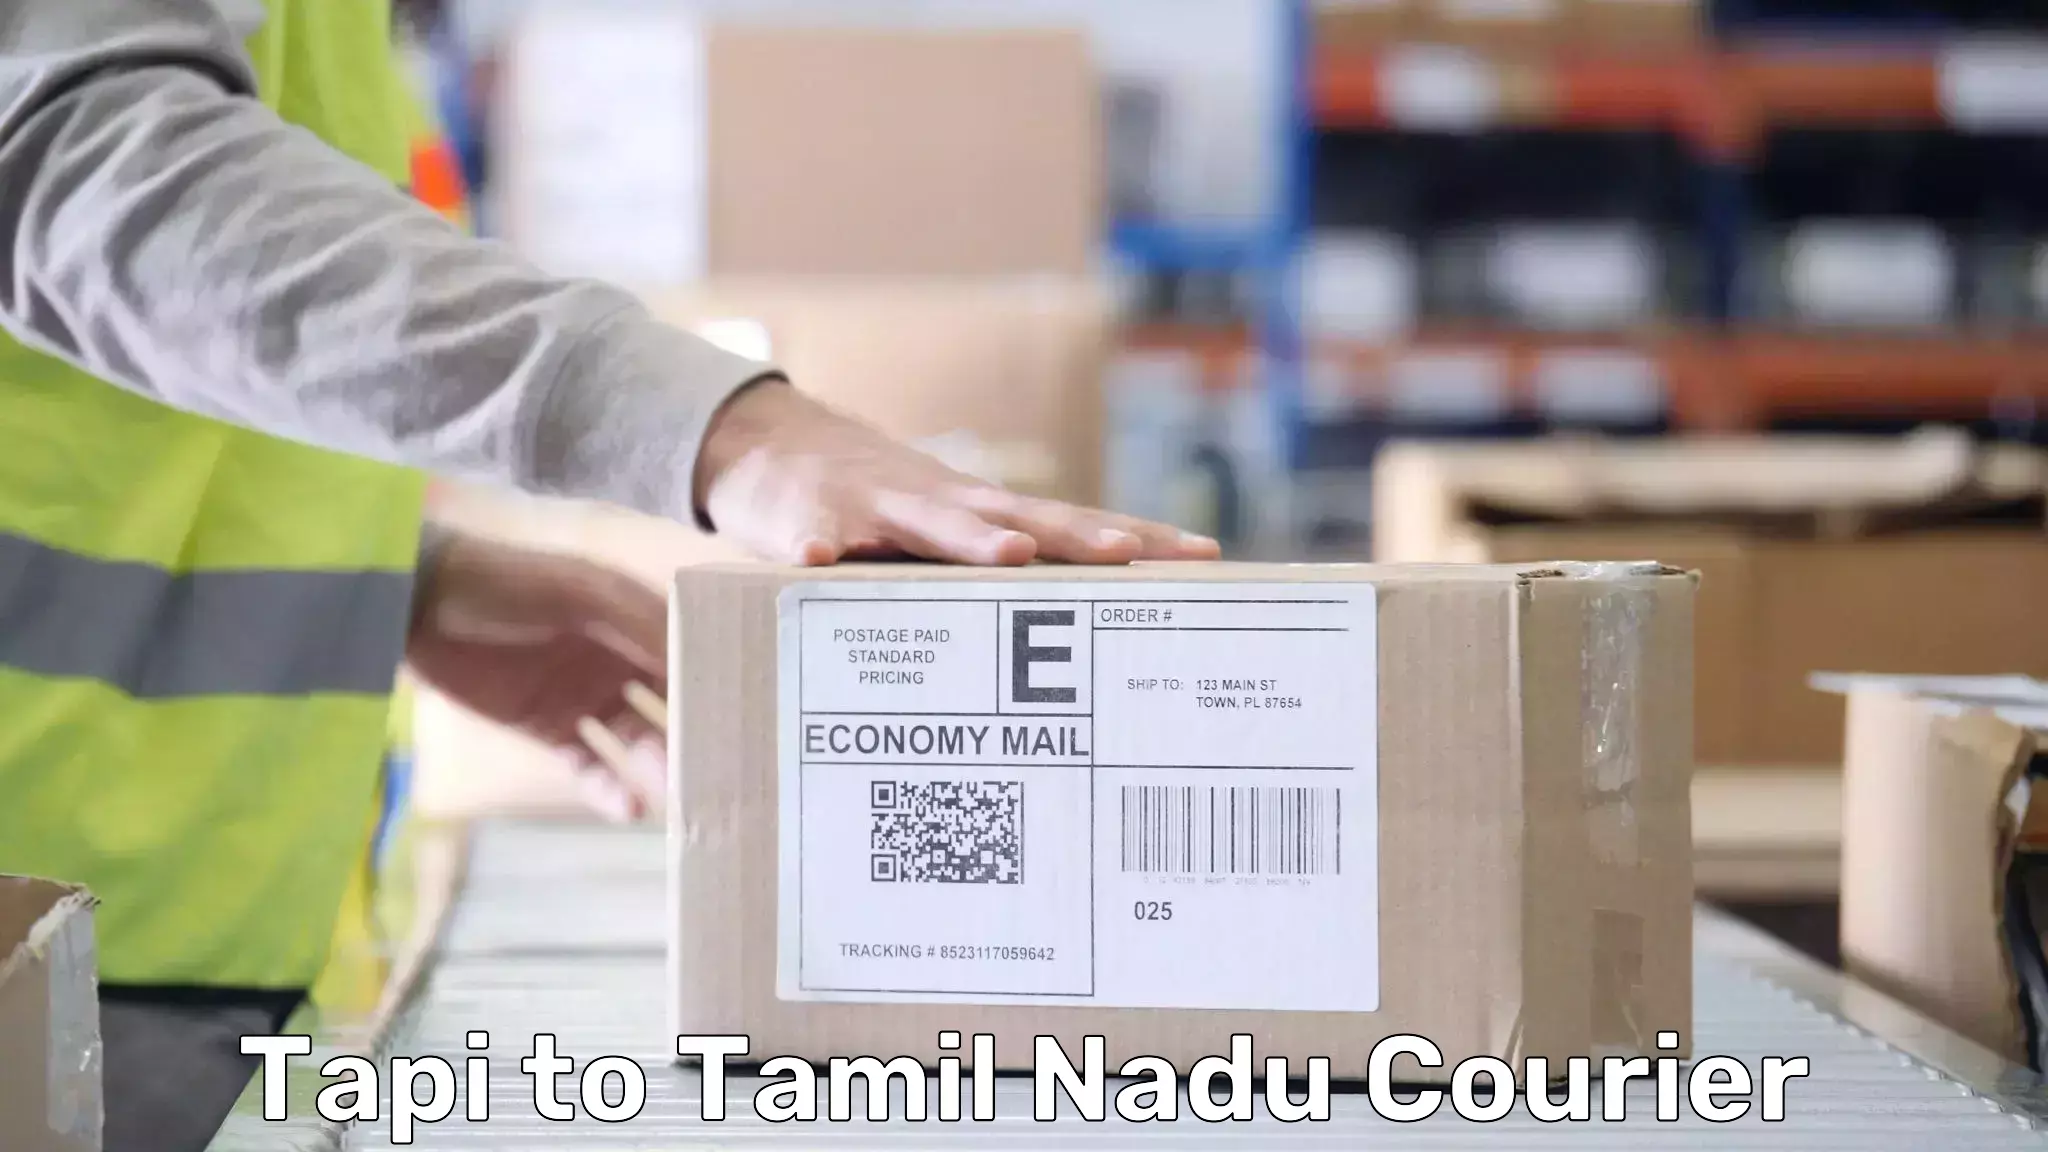 Express luggage delivery Tapi to Tamil Nadu